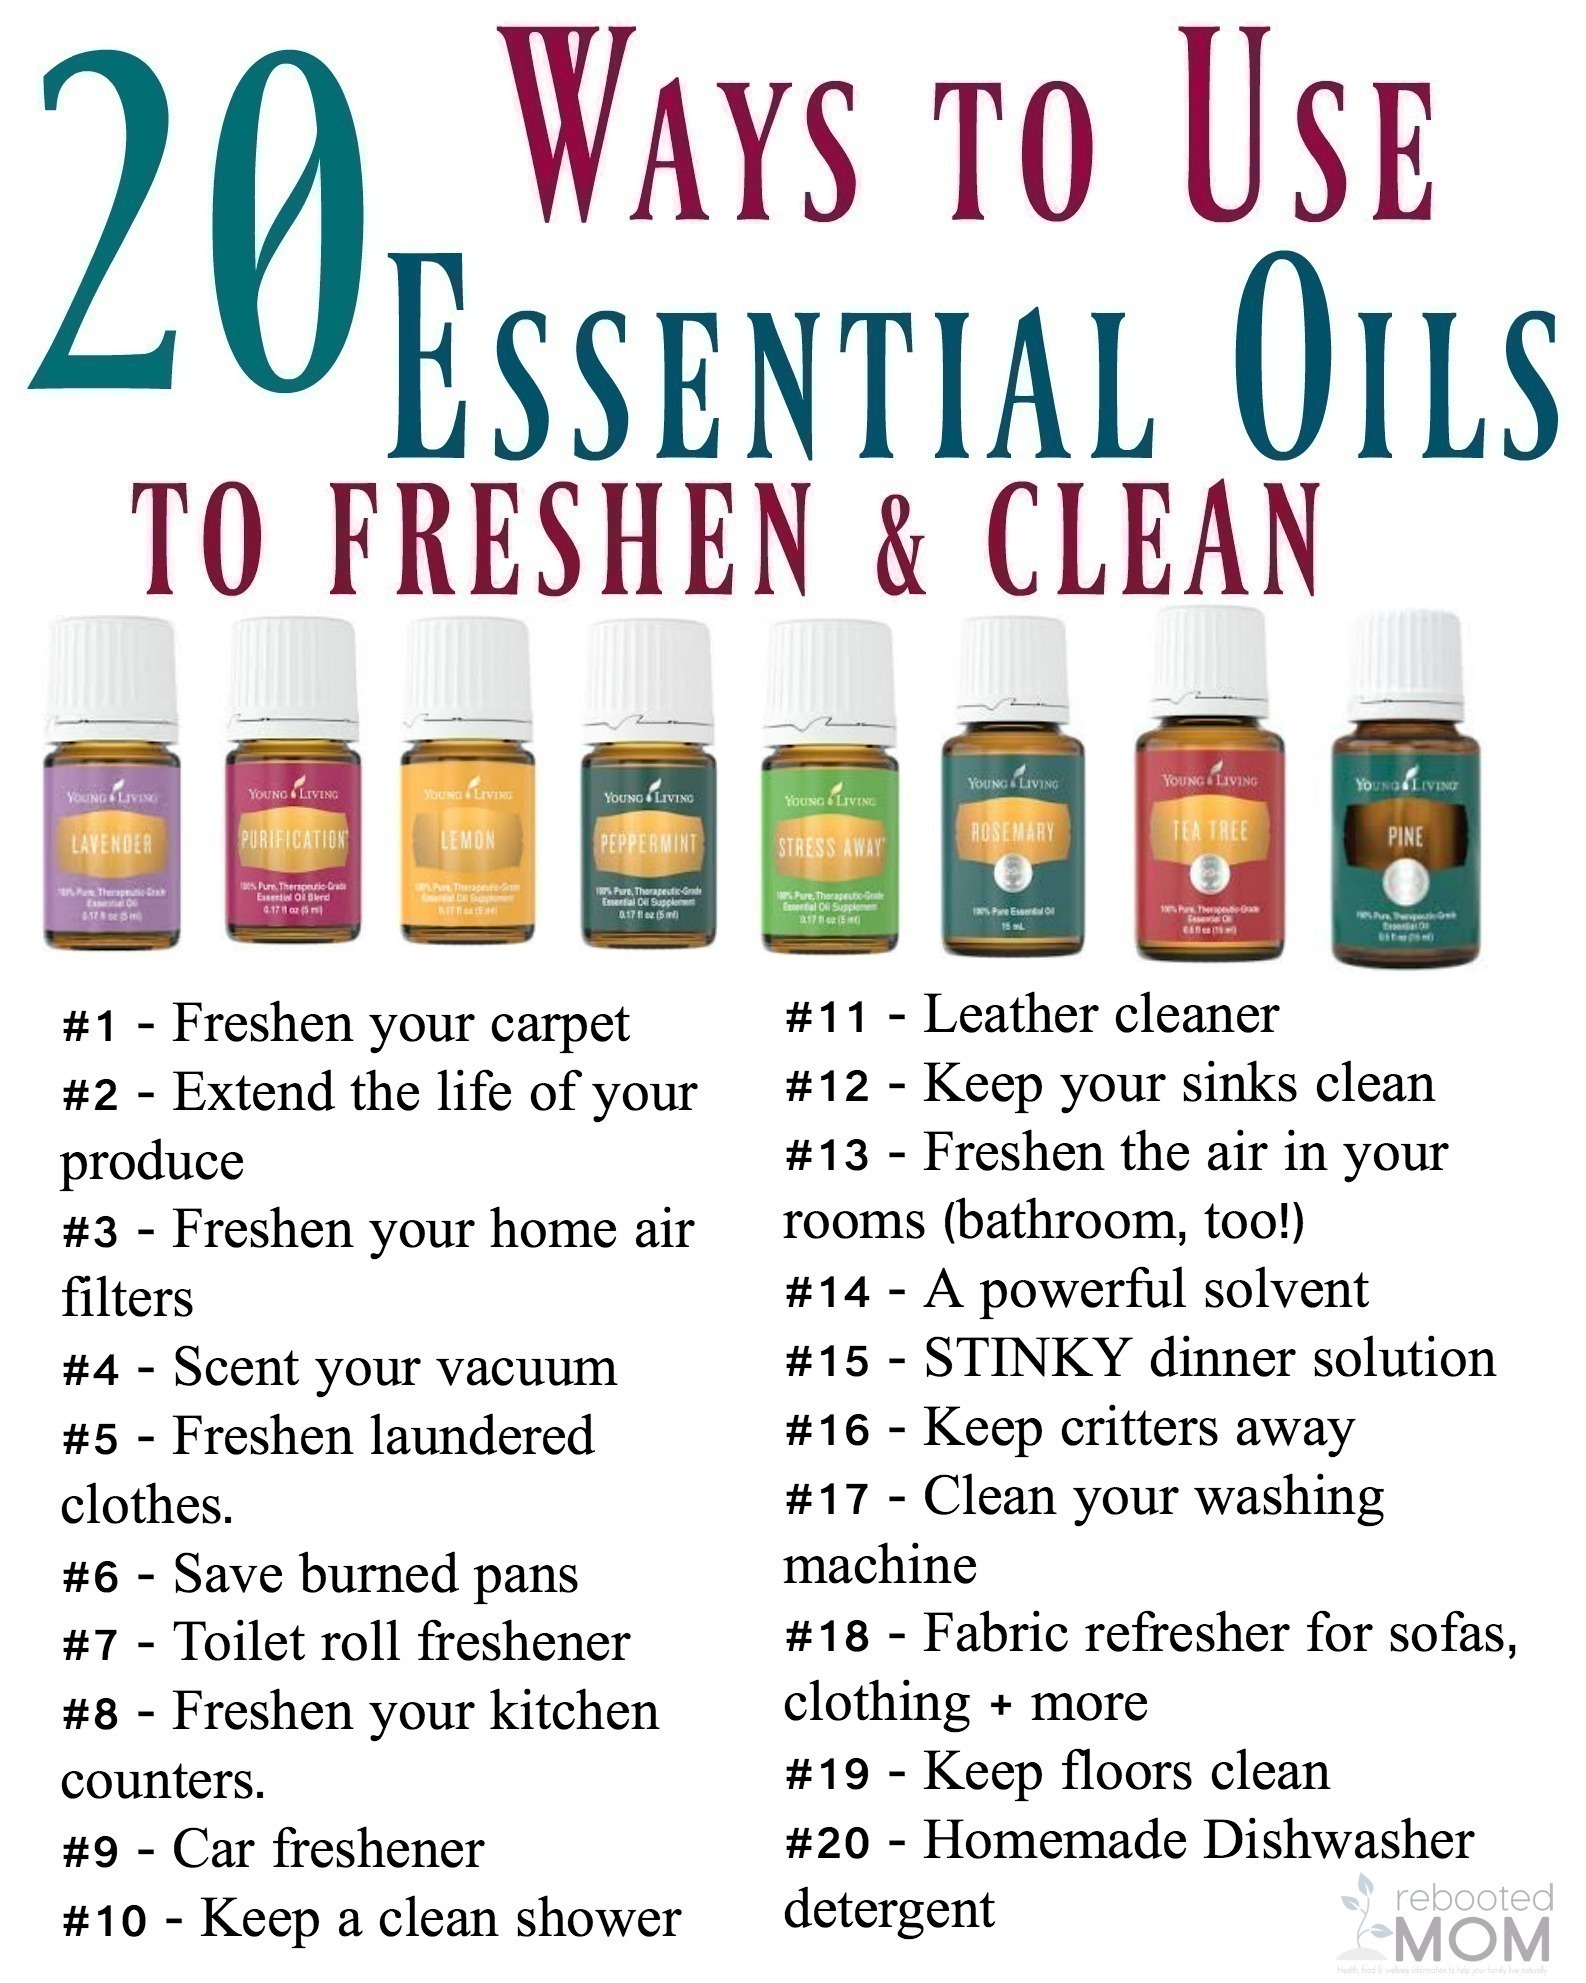 20 Ways to Use Essential Oils to Freshen & Clean